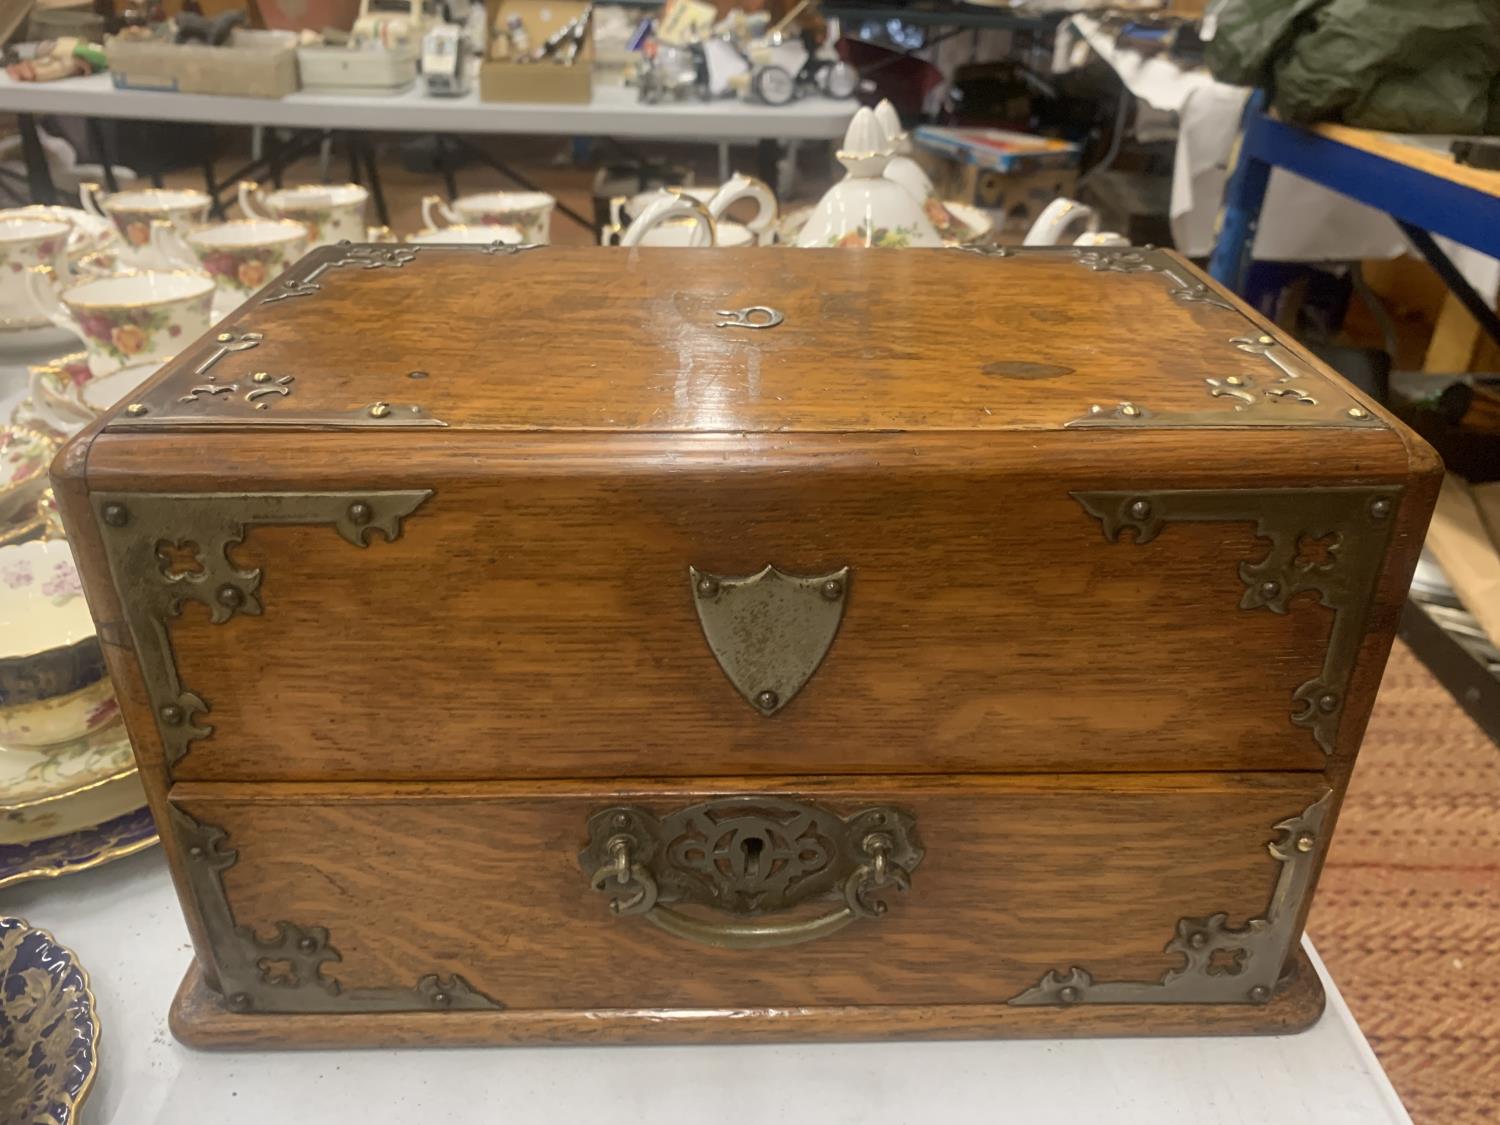 A VICTORIAN GOTHIC OAK SMOKERS CHEST WITH METAL BANDING AND SIDE HANDLES - Image 2 of 4